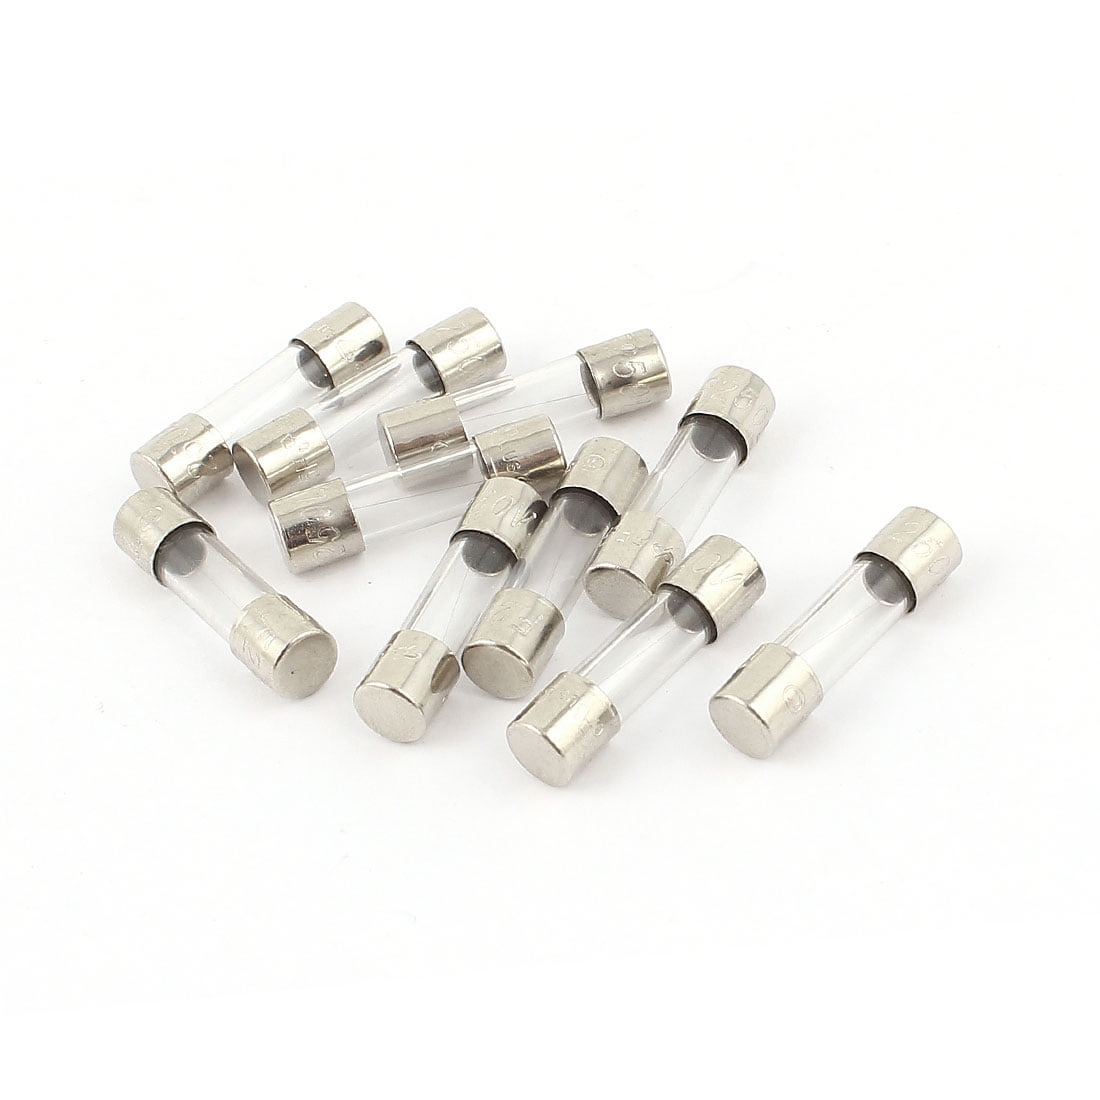 250MA 20MM QUICK BLOW FUSE PACK 10